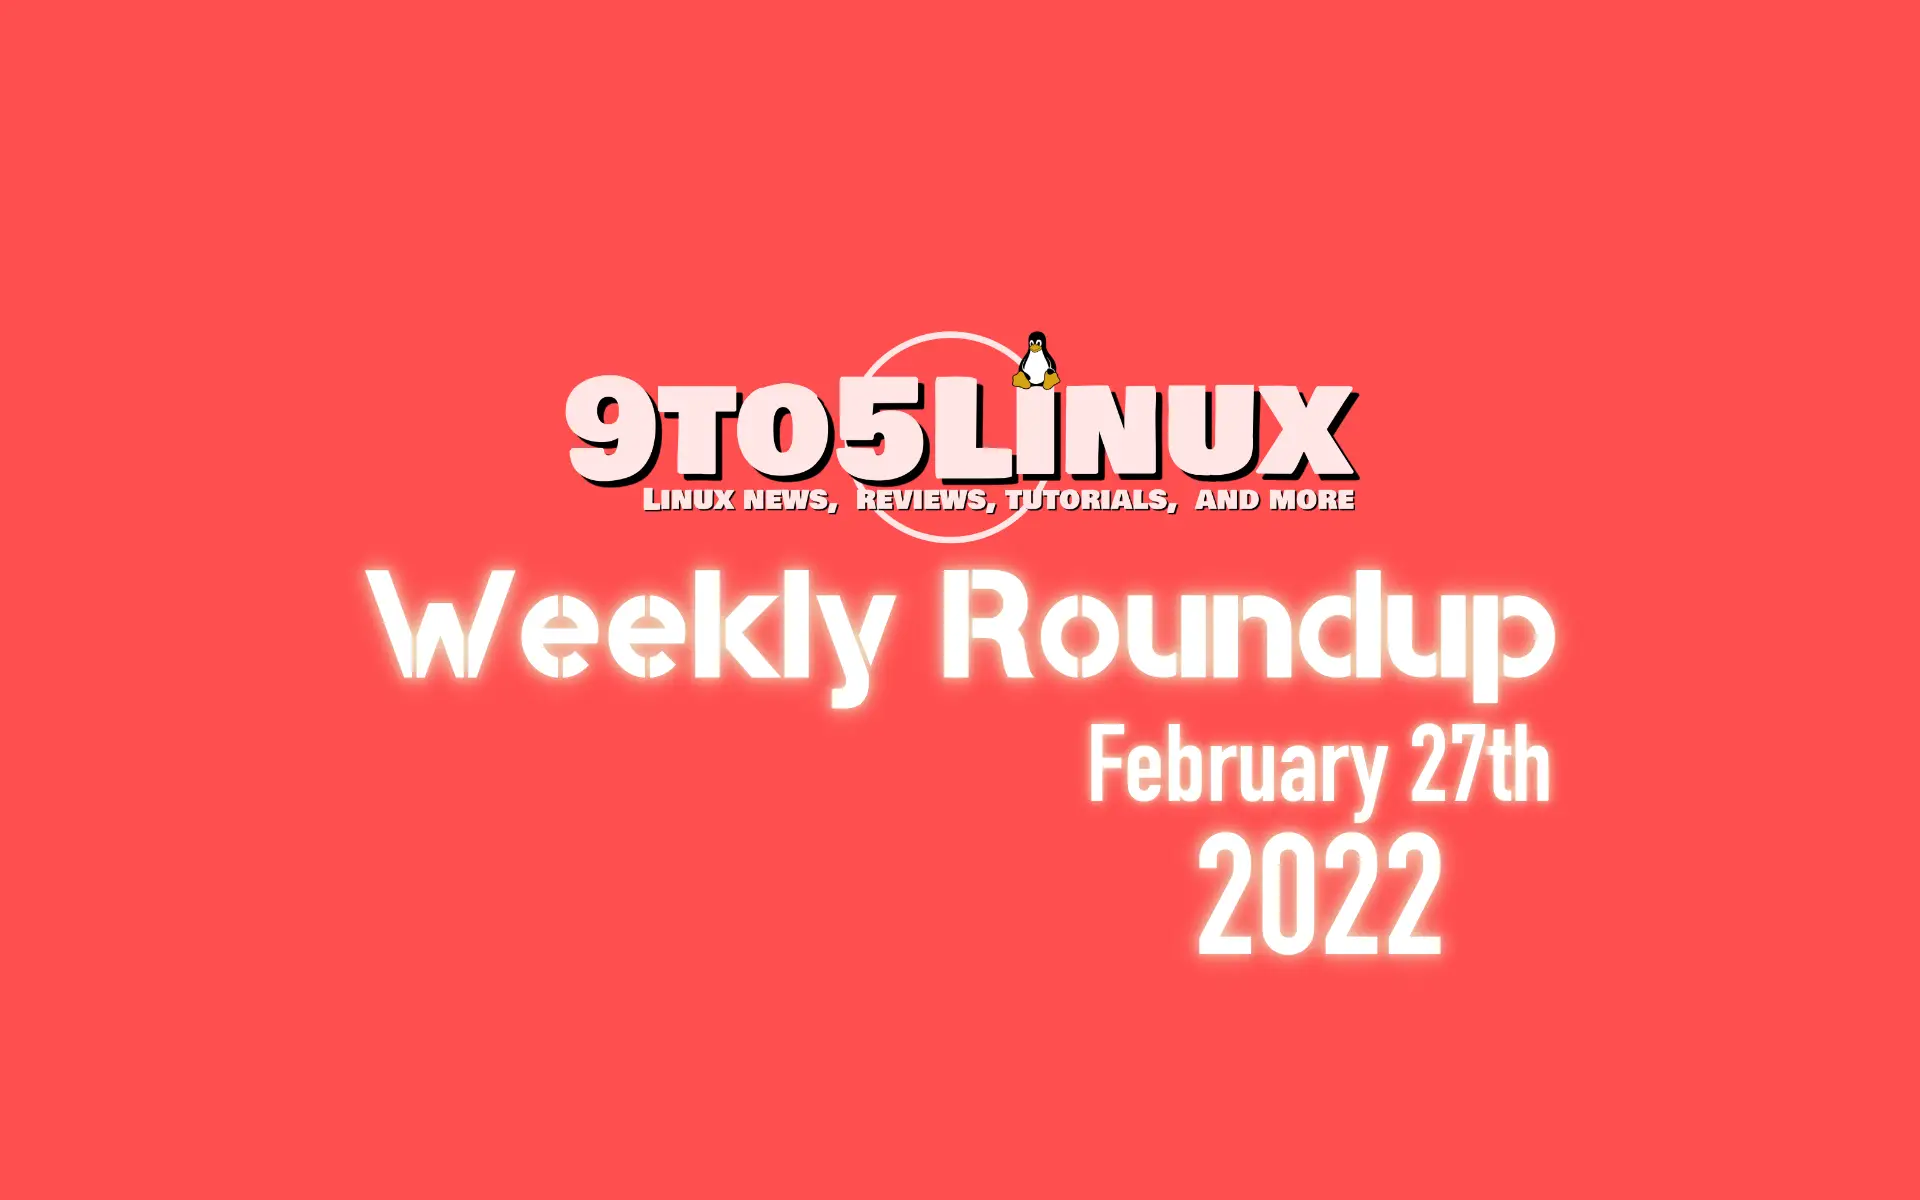 9to5Linux Weekly Roundup: February 27th, 2022